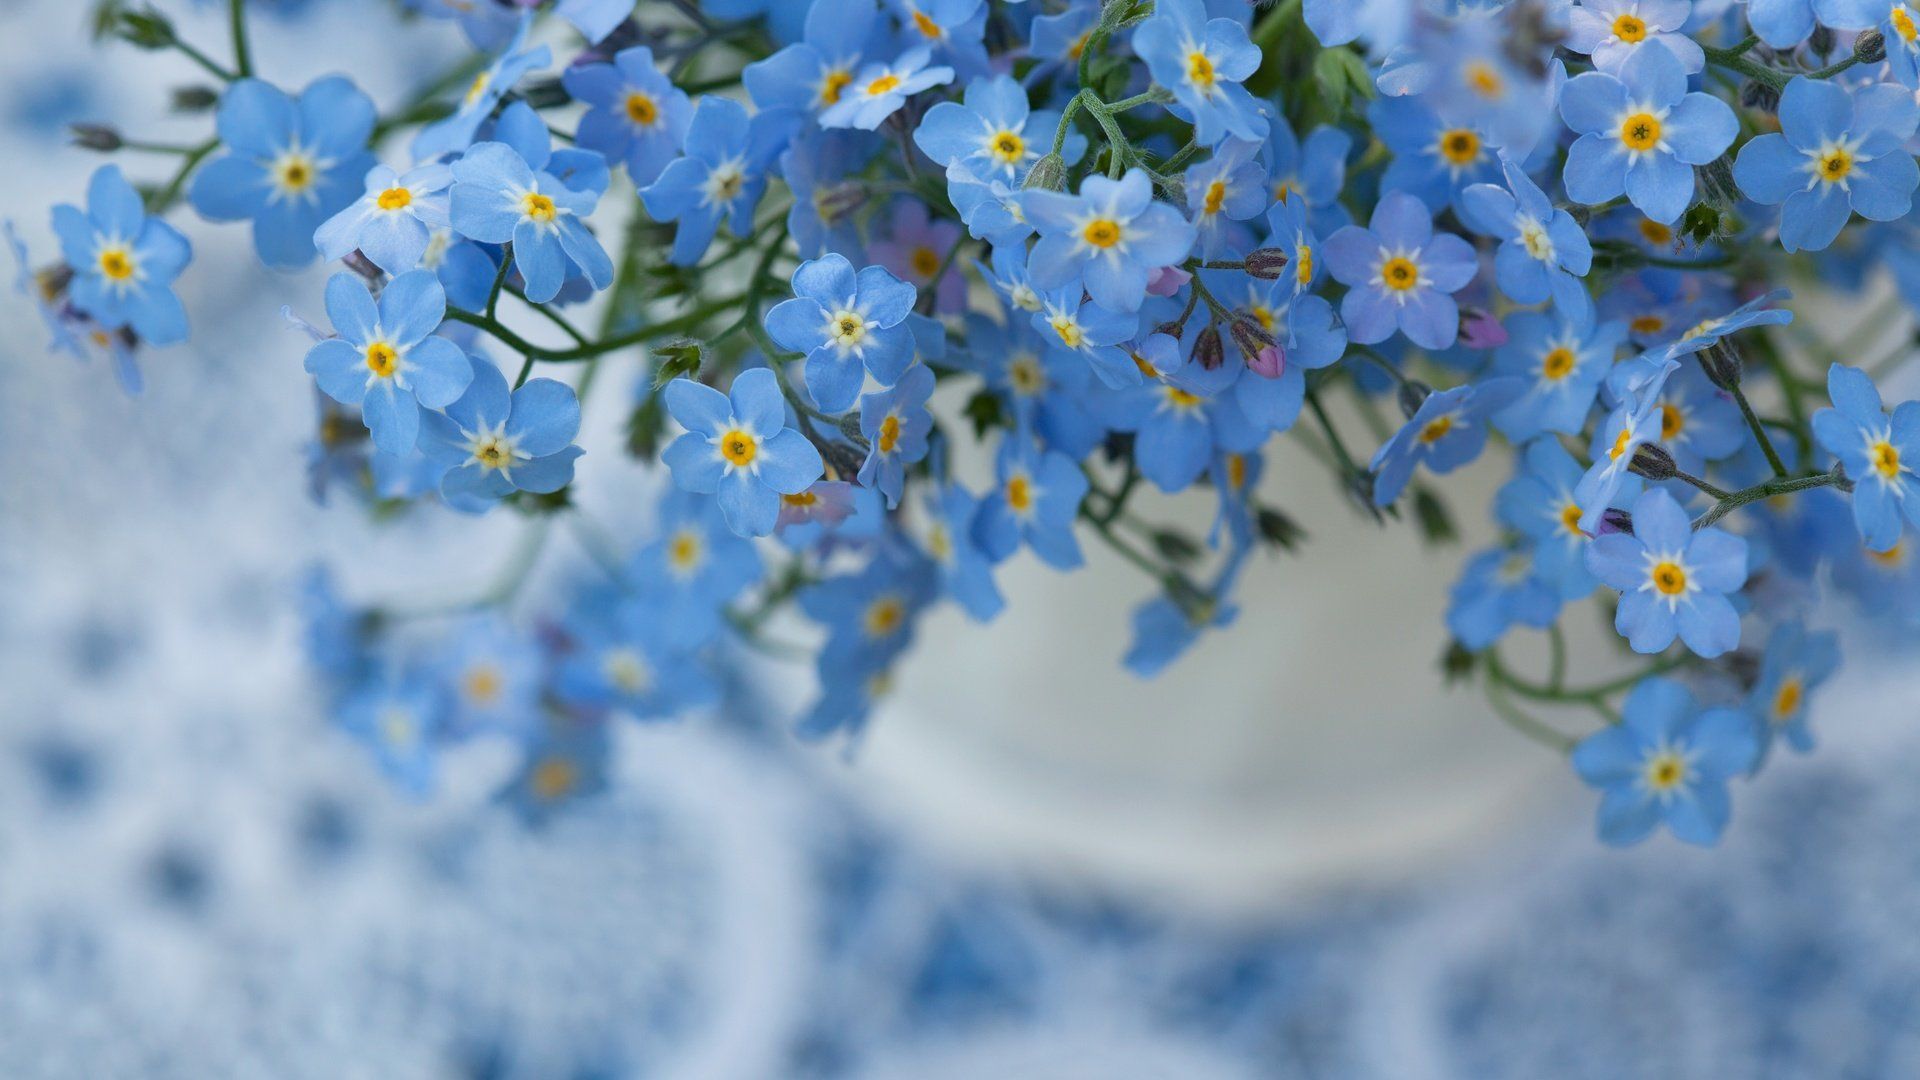 Wallpaper Download Flowers, Nature, Macro, Background, Forget Me Not Resolution 1920x1080